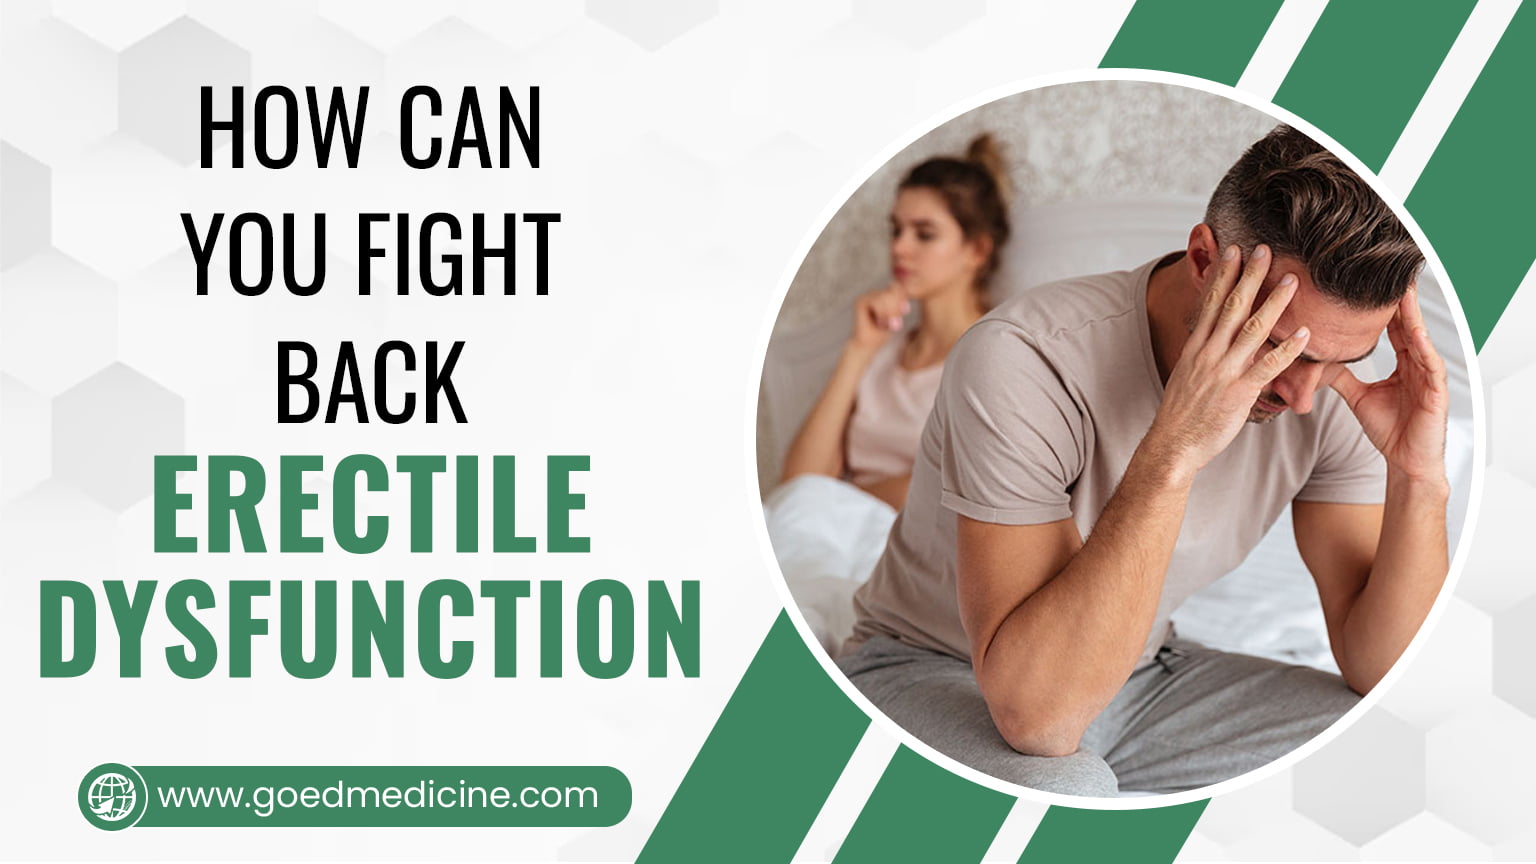 How Can You Fight Back Erectile Dysfunction